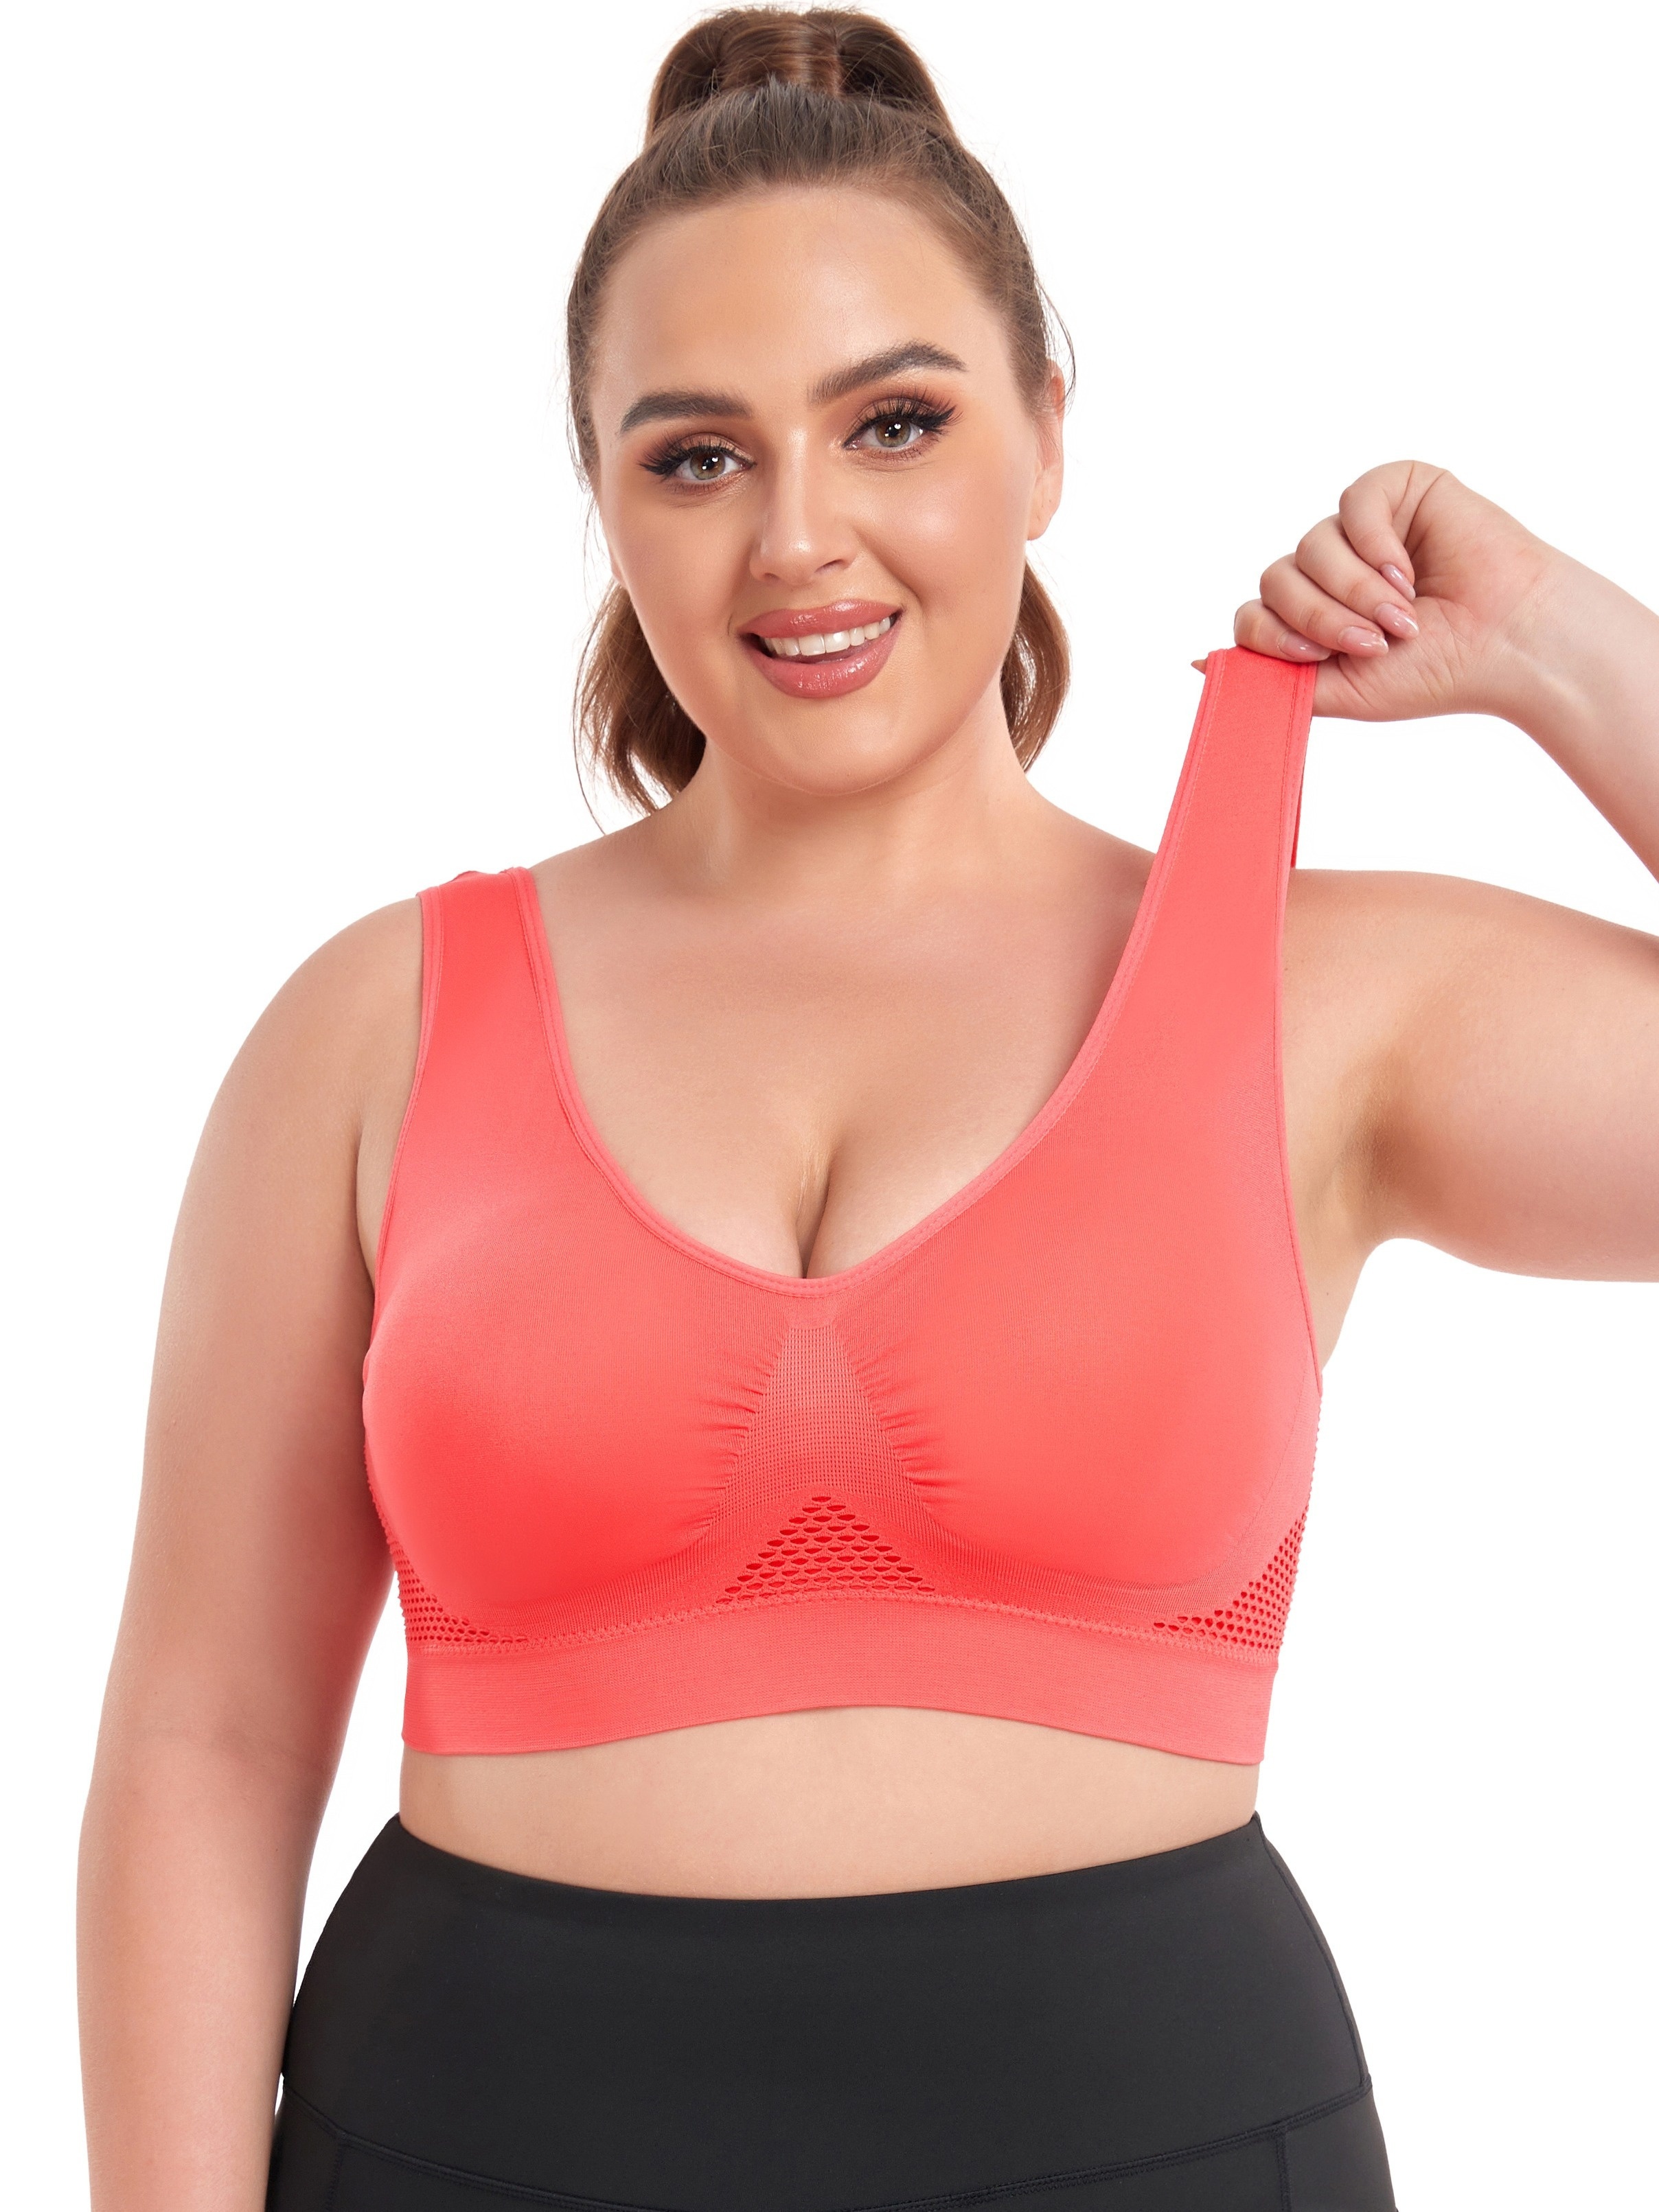 V Neck Sports Bras for Women High Impact Gym Push Up Crop Solid